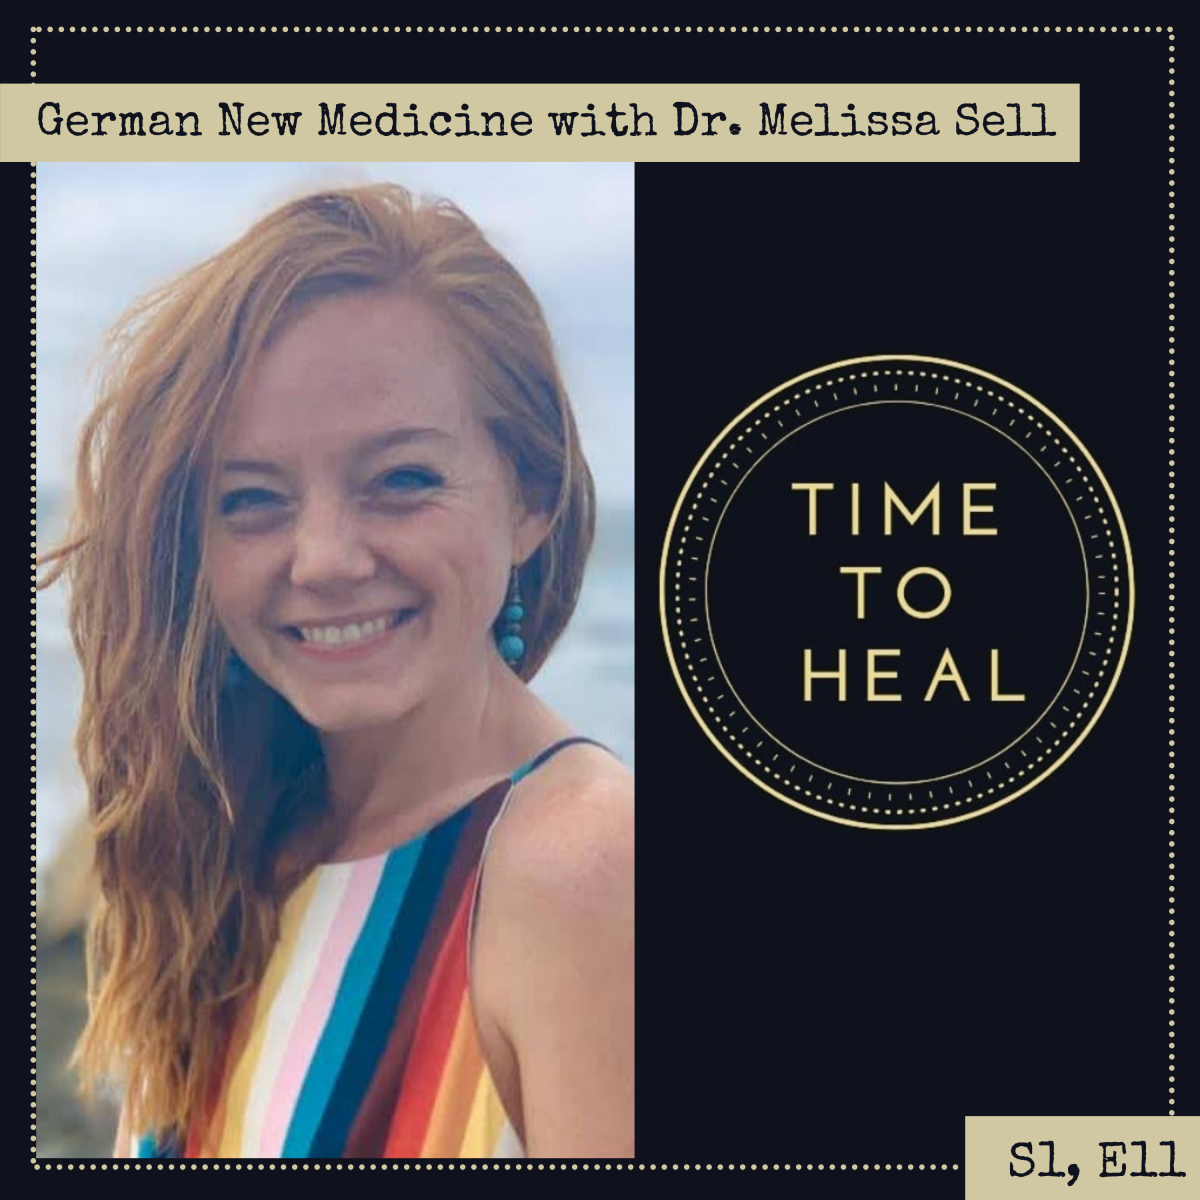 German New Medicine with Dr. Melissa Sell